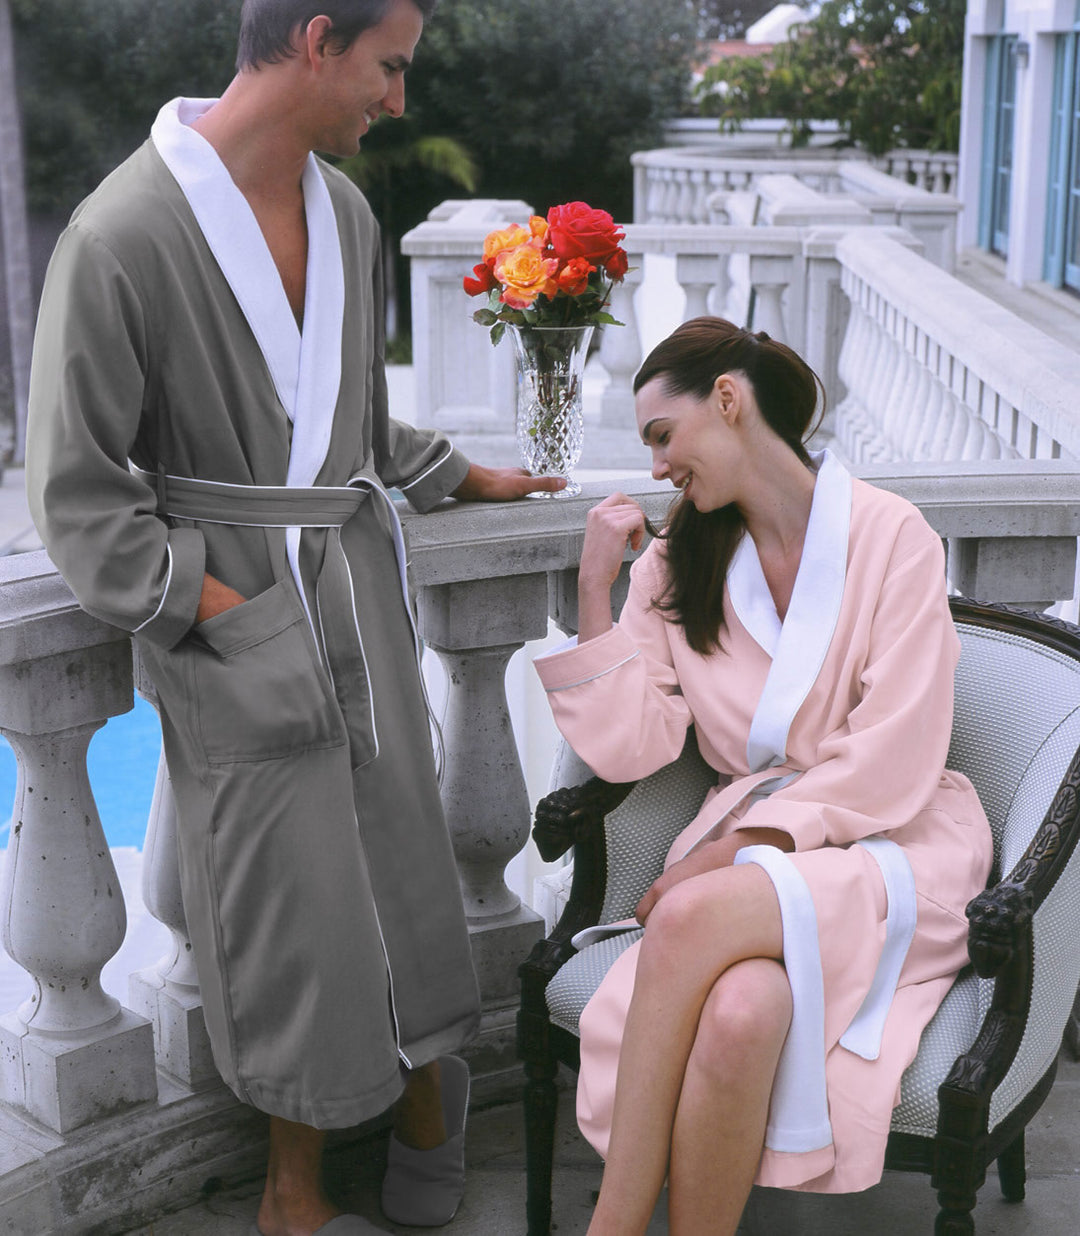 Spa Robe Terry Cloth - Spa Robes For Men